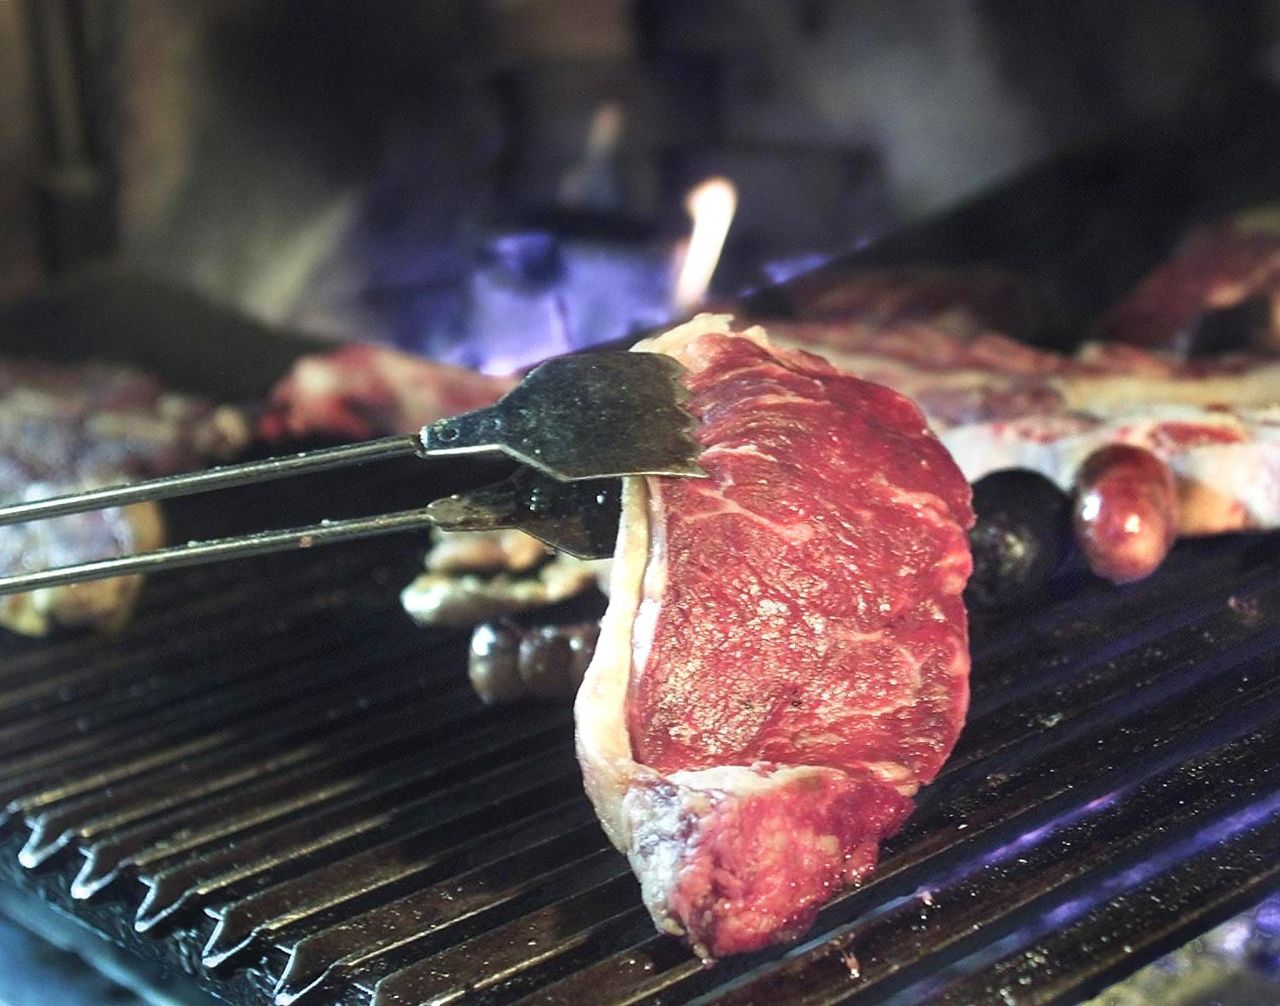 Steaks, on the other hand, stay contaminated mainly on the outside, so as long as the exterior is cooked, the meat within should be safe to eat.